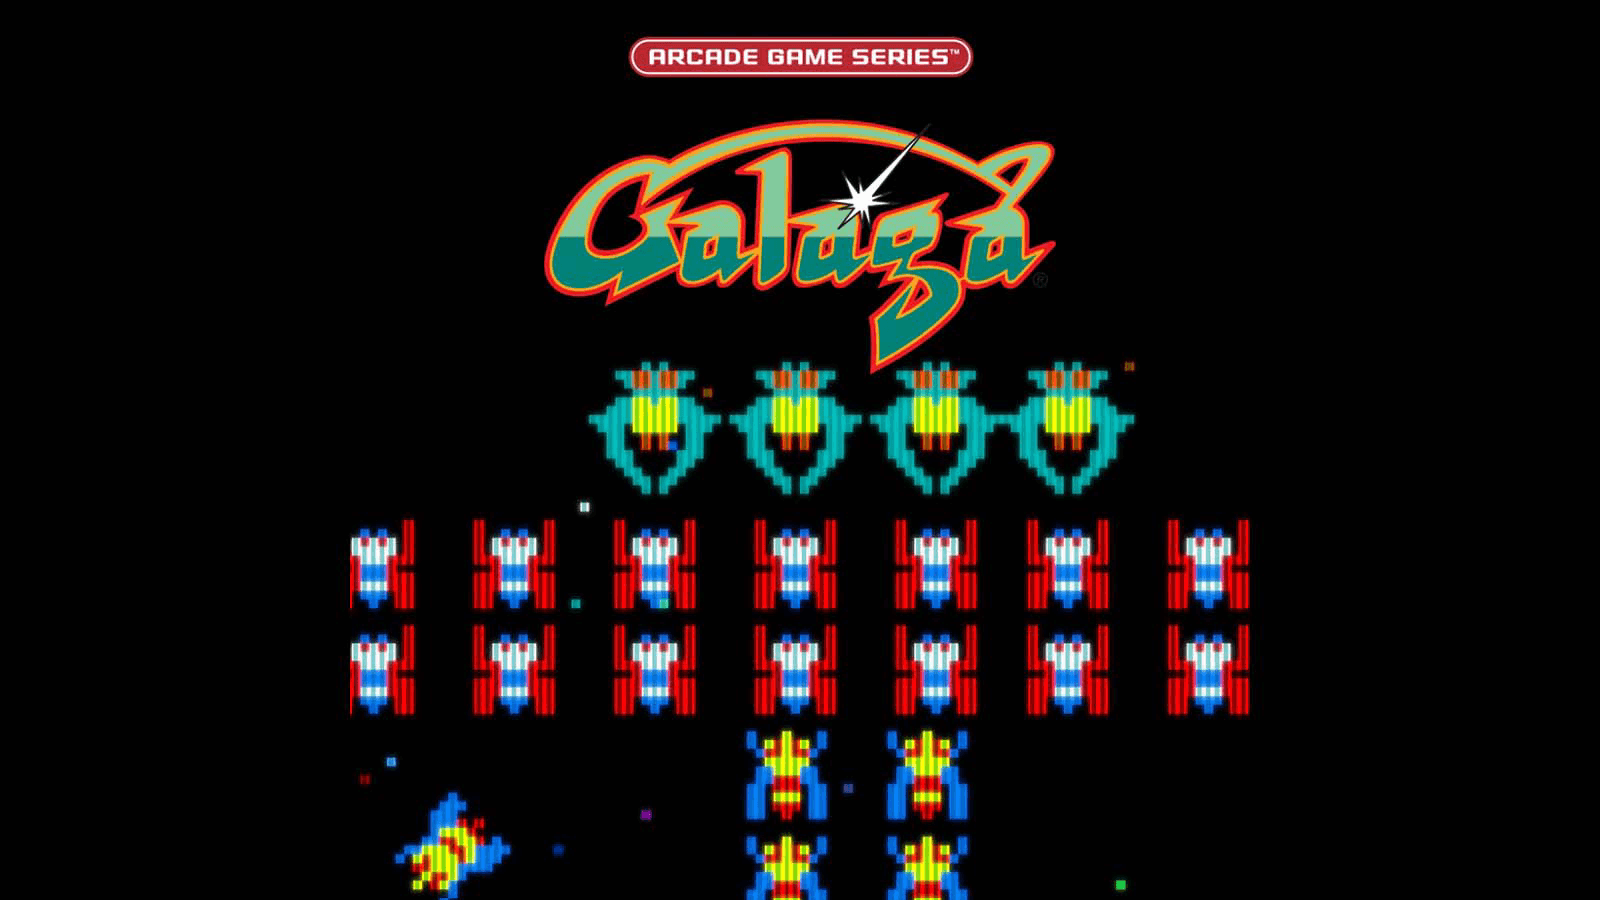 Galaga Logo - SYFY Arcade classic Galaga is about to become an animated series